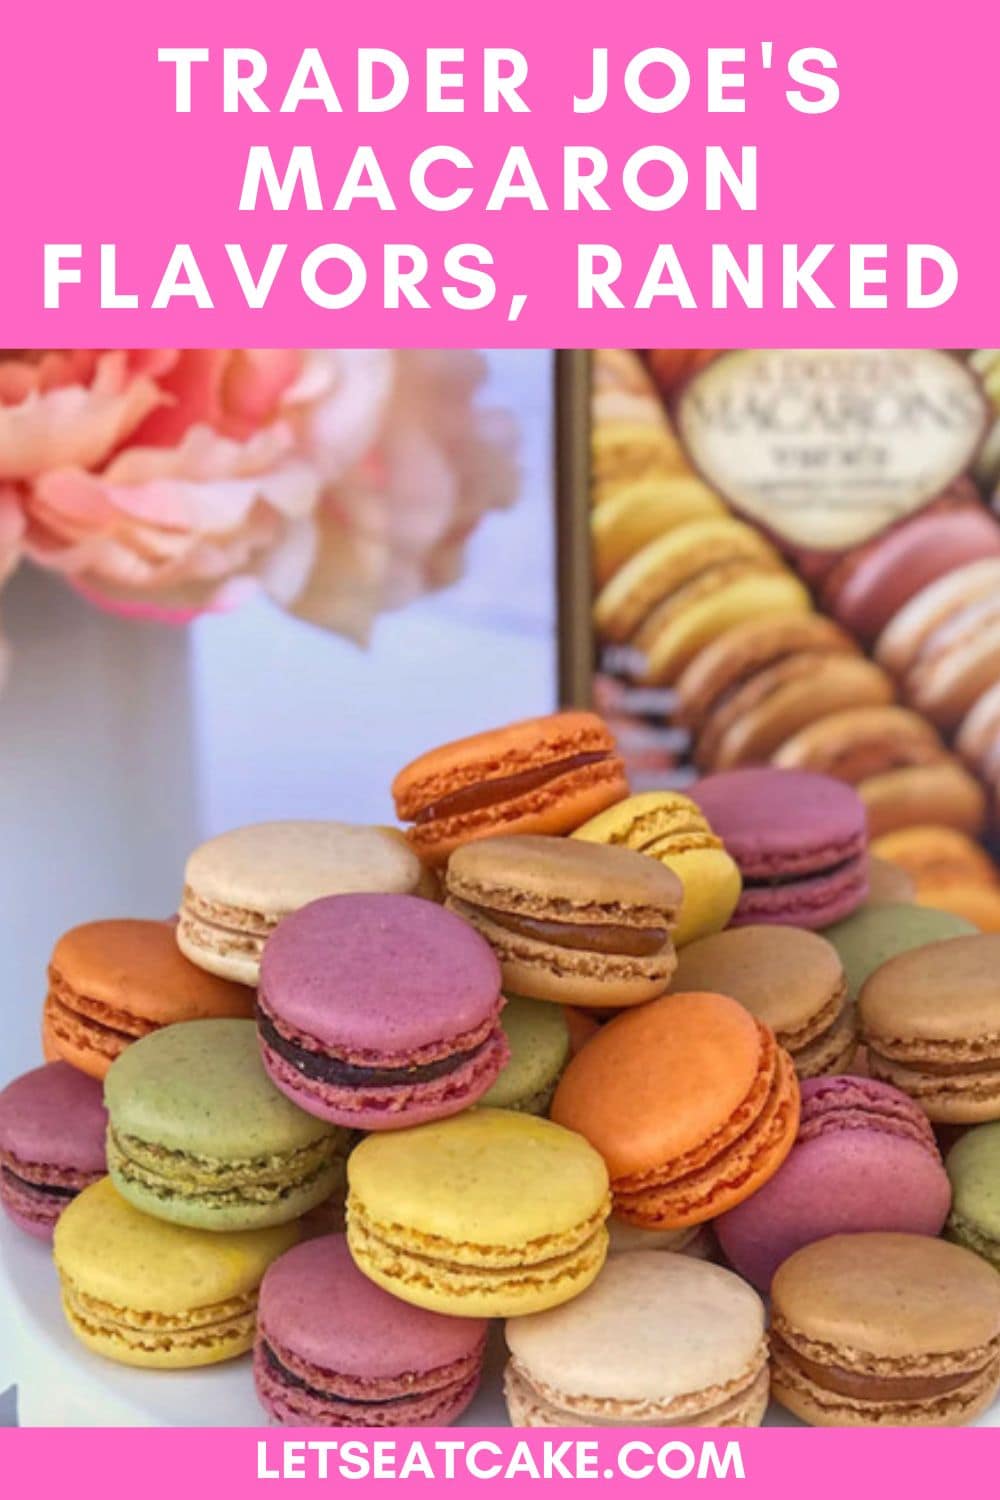 We Tried and Ranked All the Trader Joe’s Macarons - Let's Eat Cake